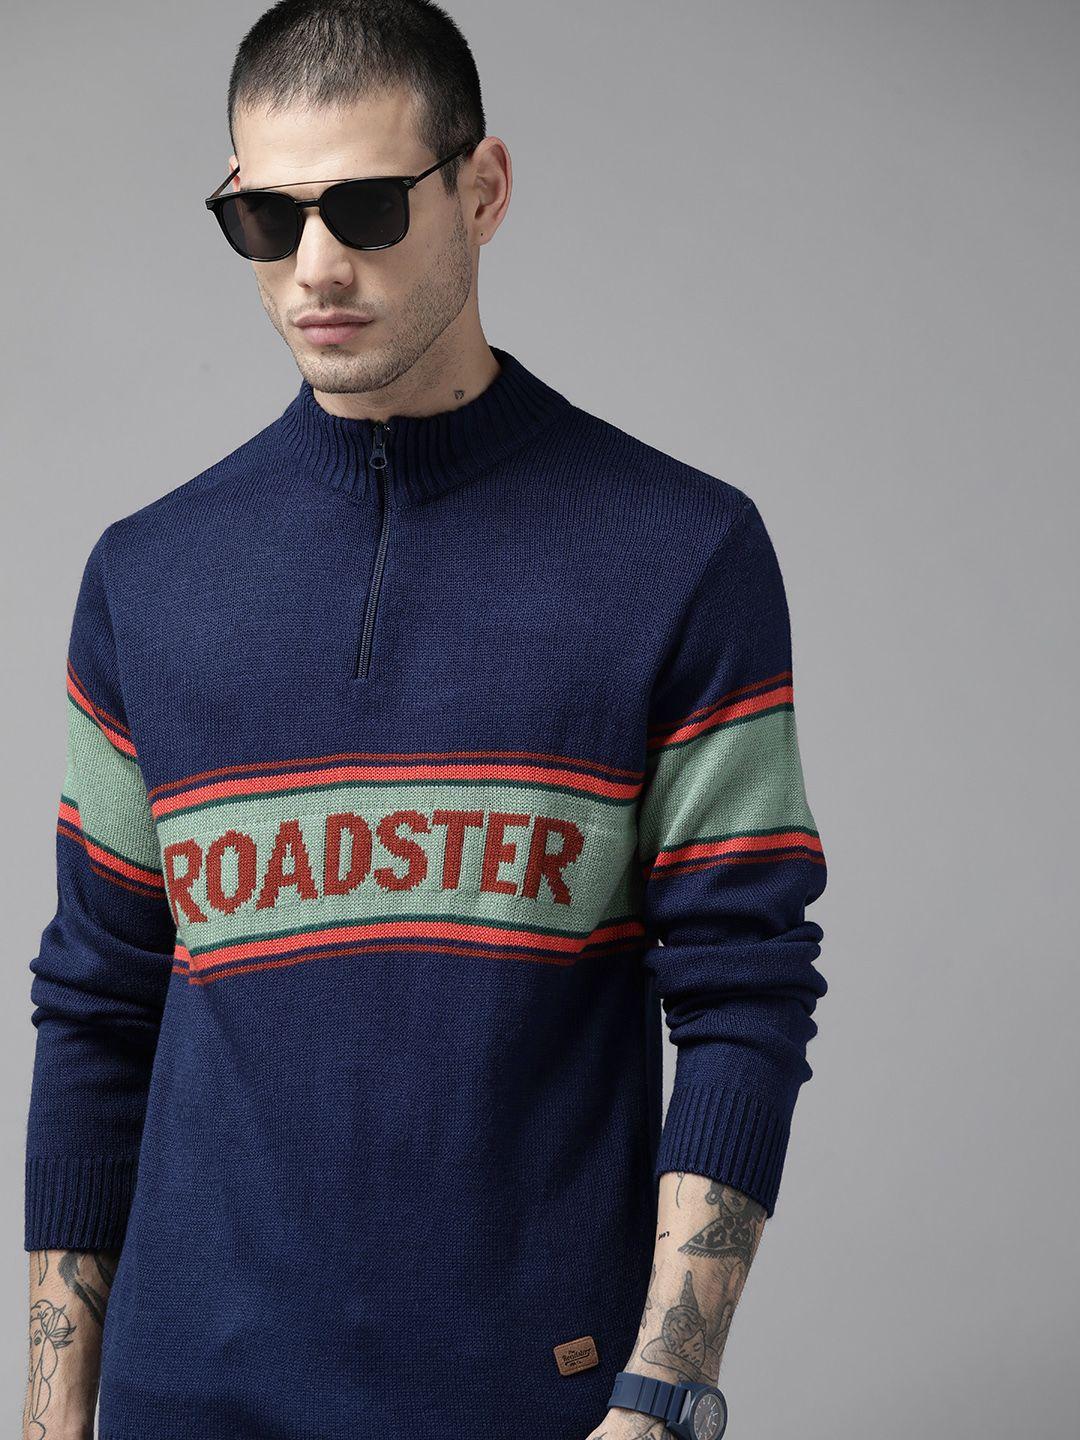 the-roadster-lifestyle-co.-men-blue-&-green-printed-pullover